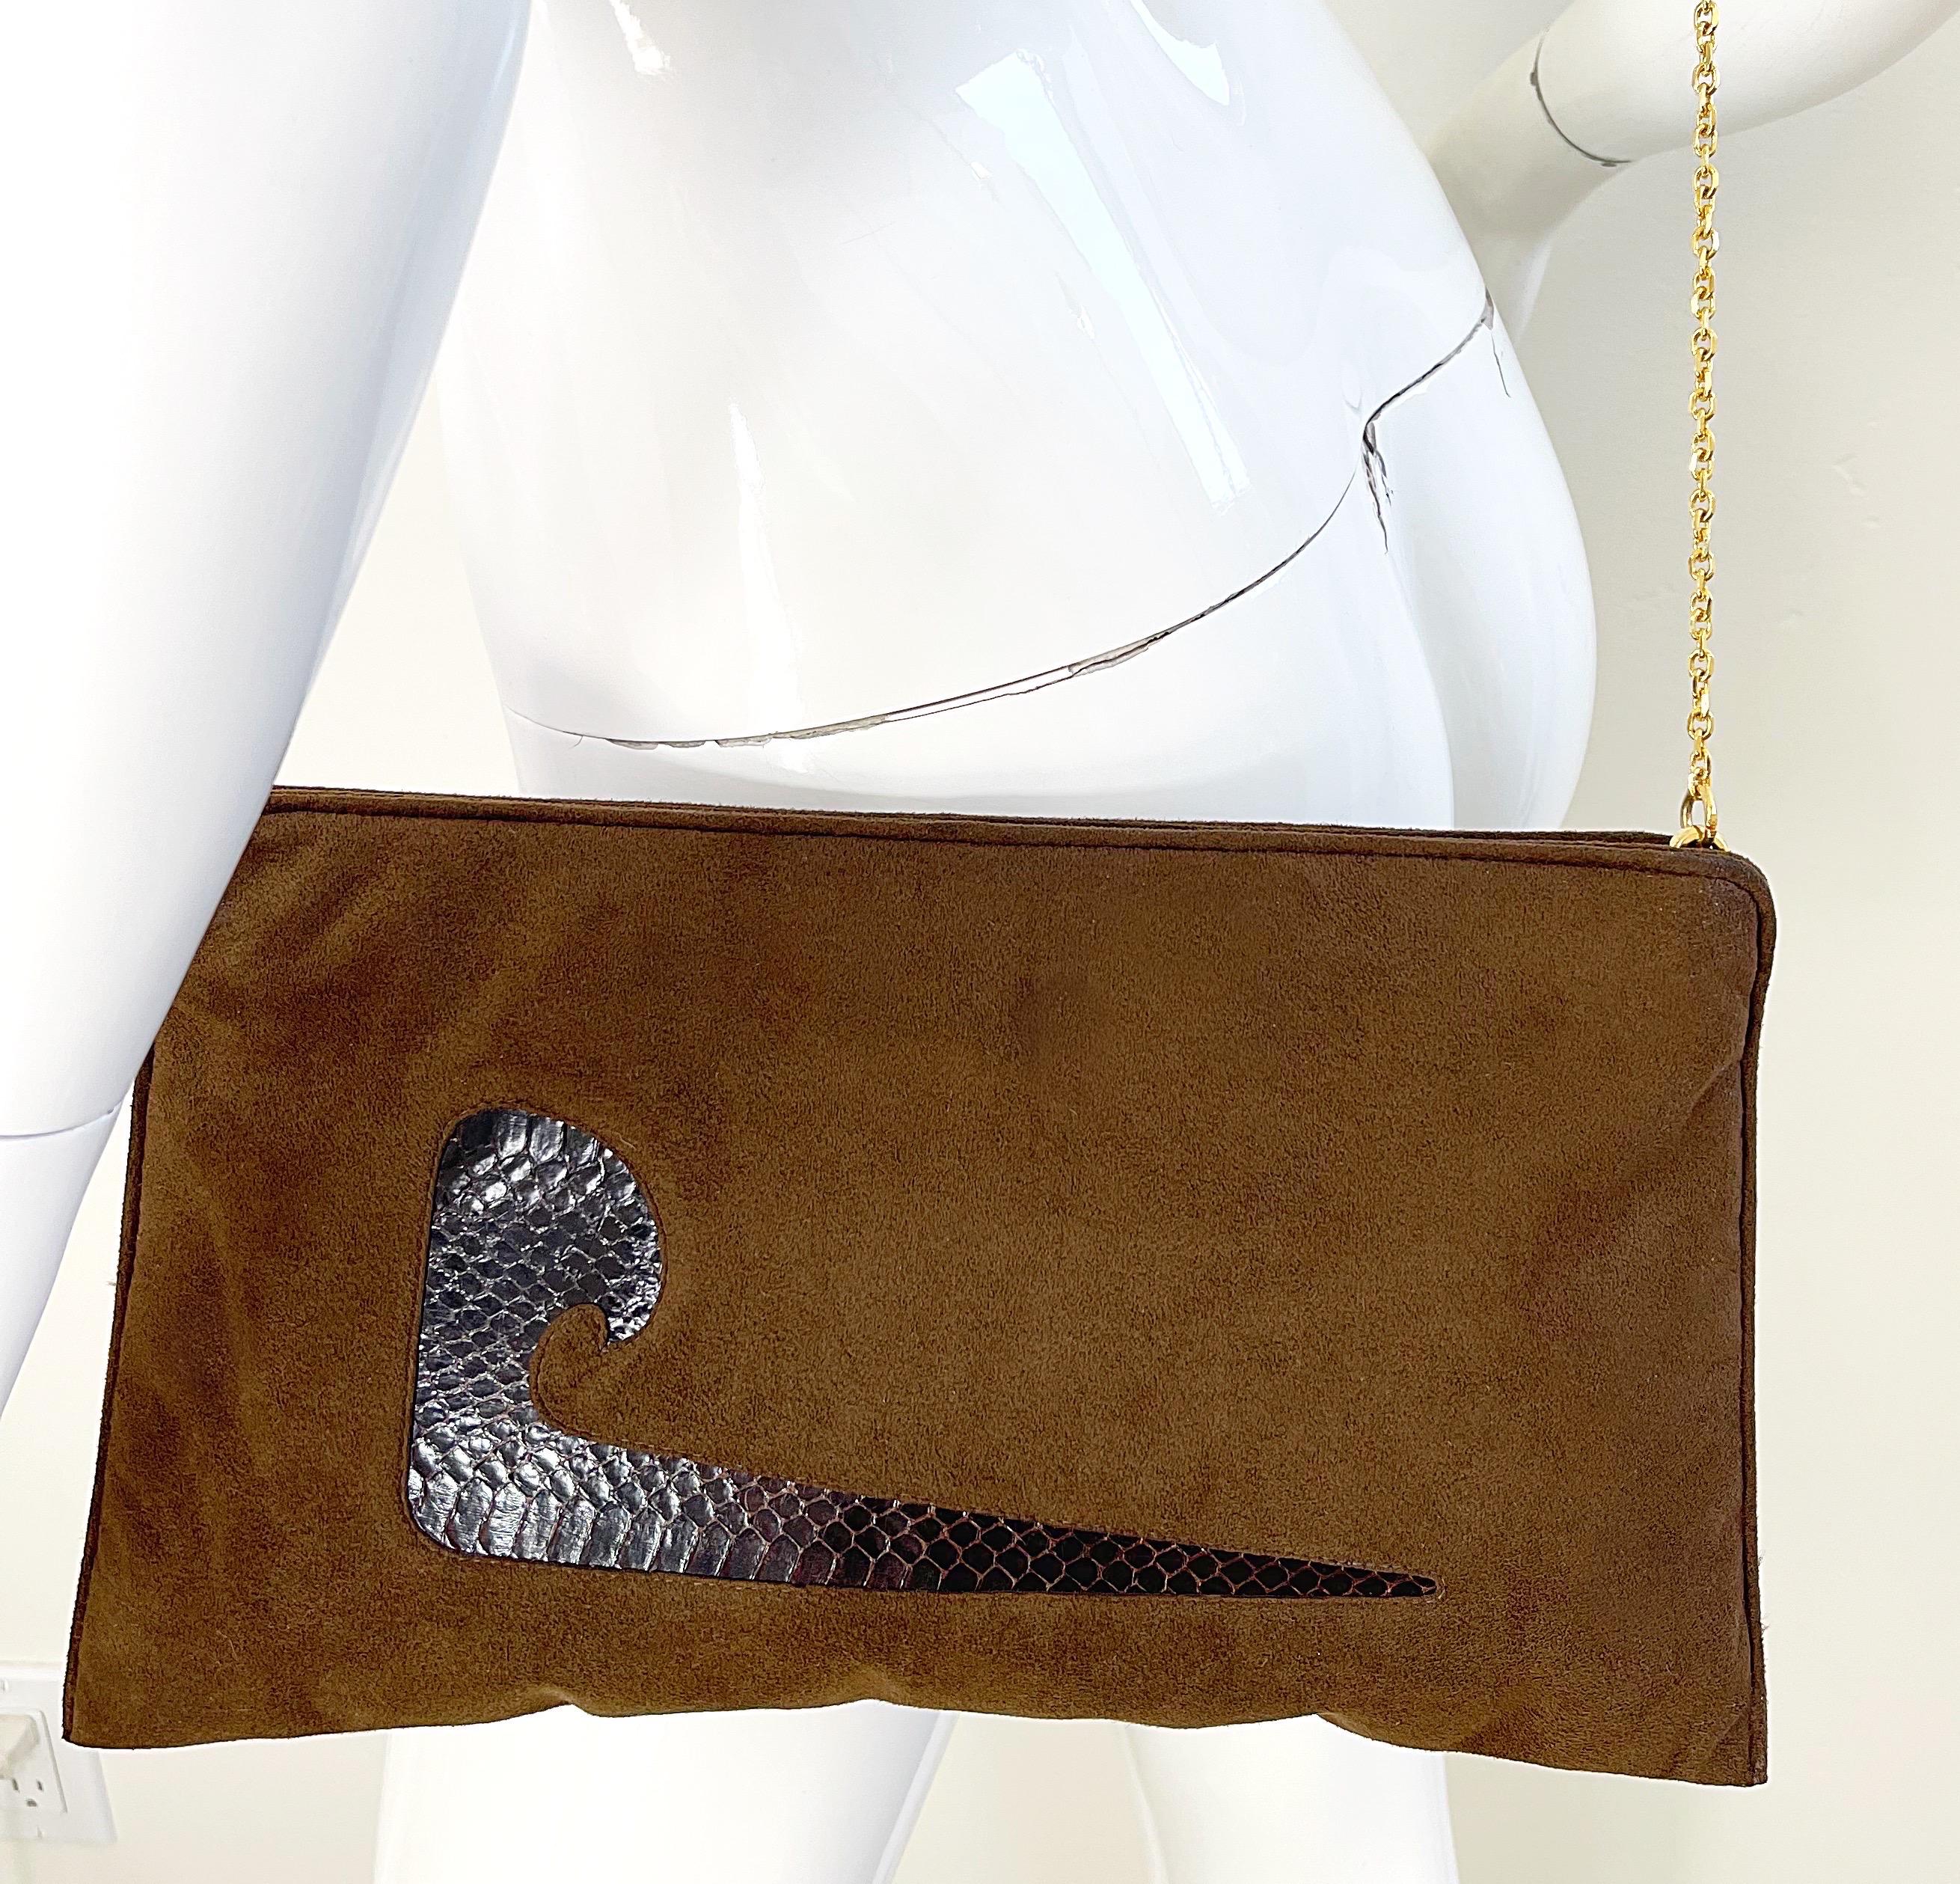 Amazing early 1970s PIERRE CARDIN brown ultra suede and snakeskin large bag, clutch or crossbody ! Hinge closure secures everything. Attached gold chain can be tucked in the bag to wear as a clutch. Can easily dress up or down.
In great